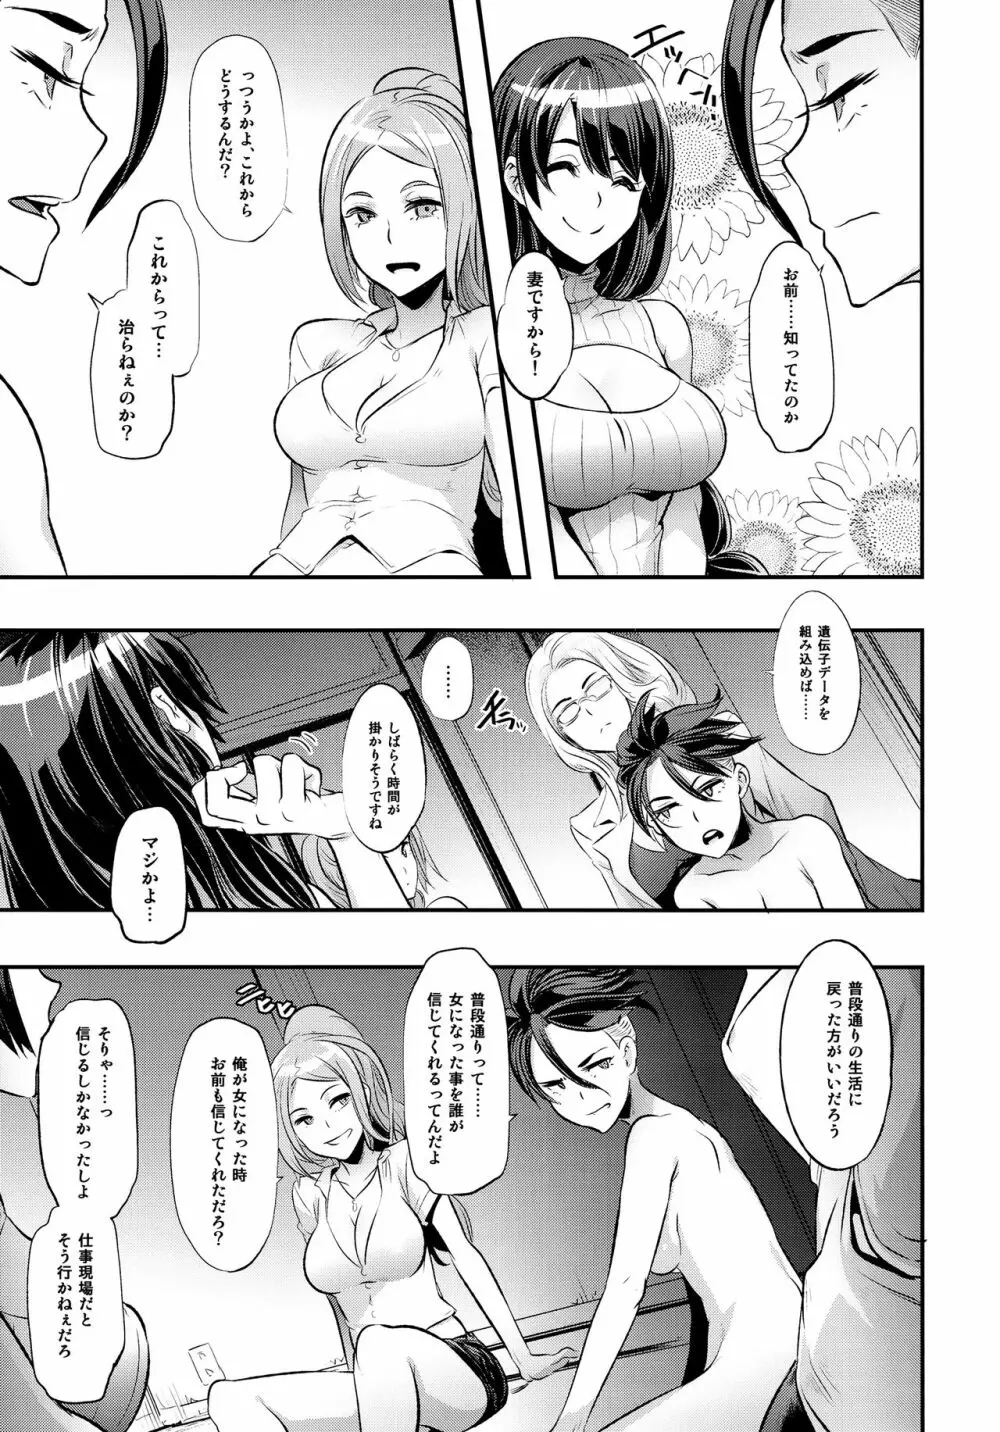 TSF物語 Append 4.0 - page8